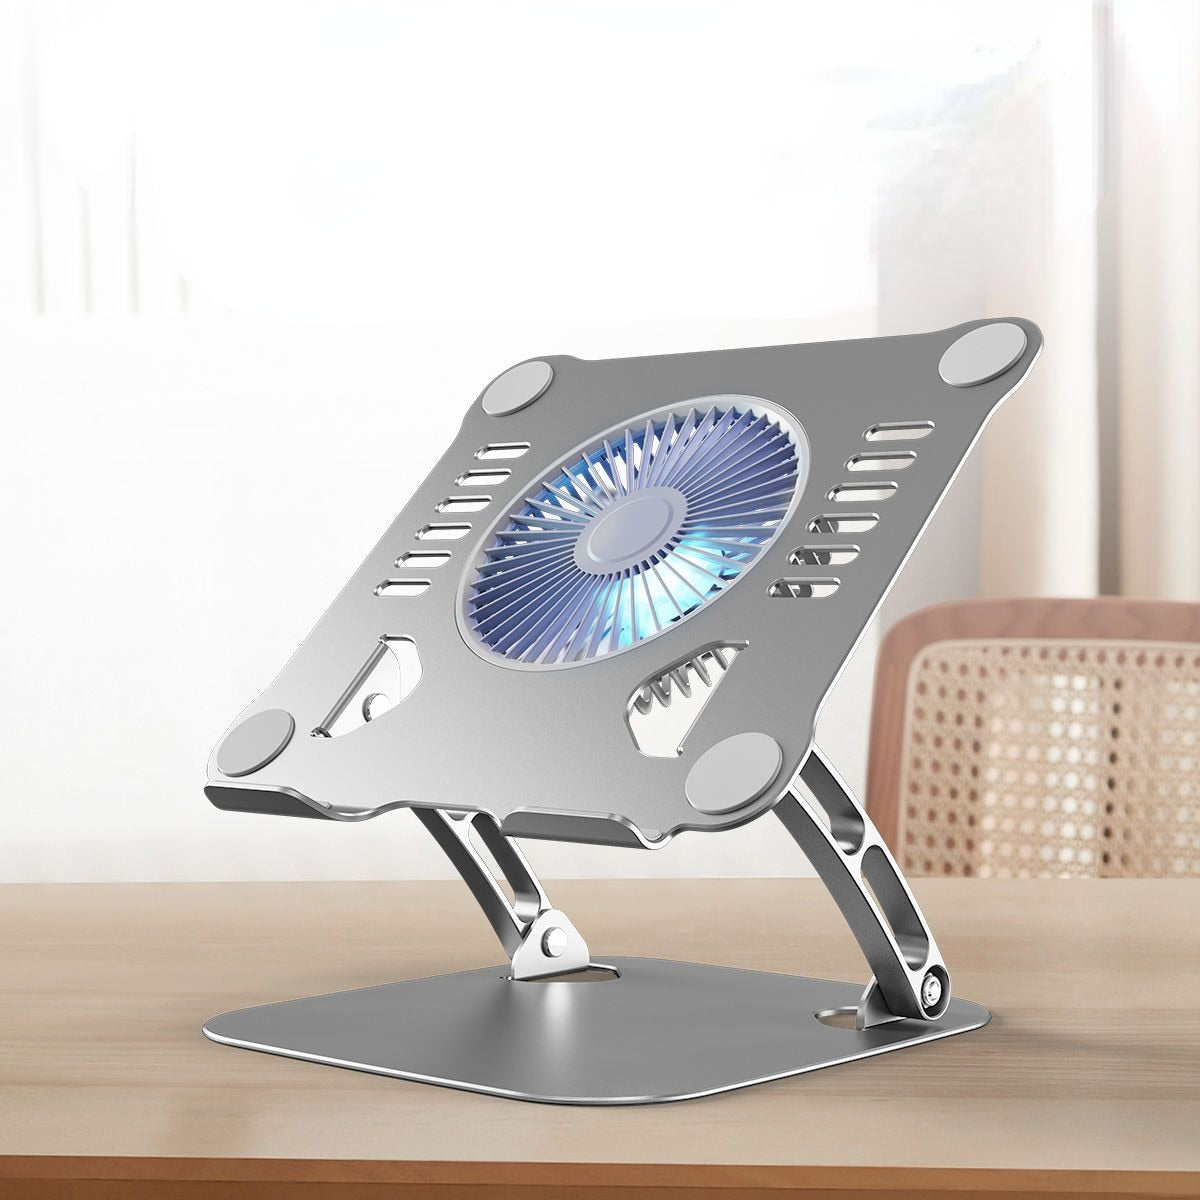 Aluminum Cooling Laptop Stand Adjustable Angle Folding Tablet Holder with Mute Fan for MacBook Air Pro Notebook Computer Desk